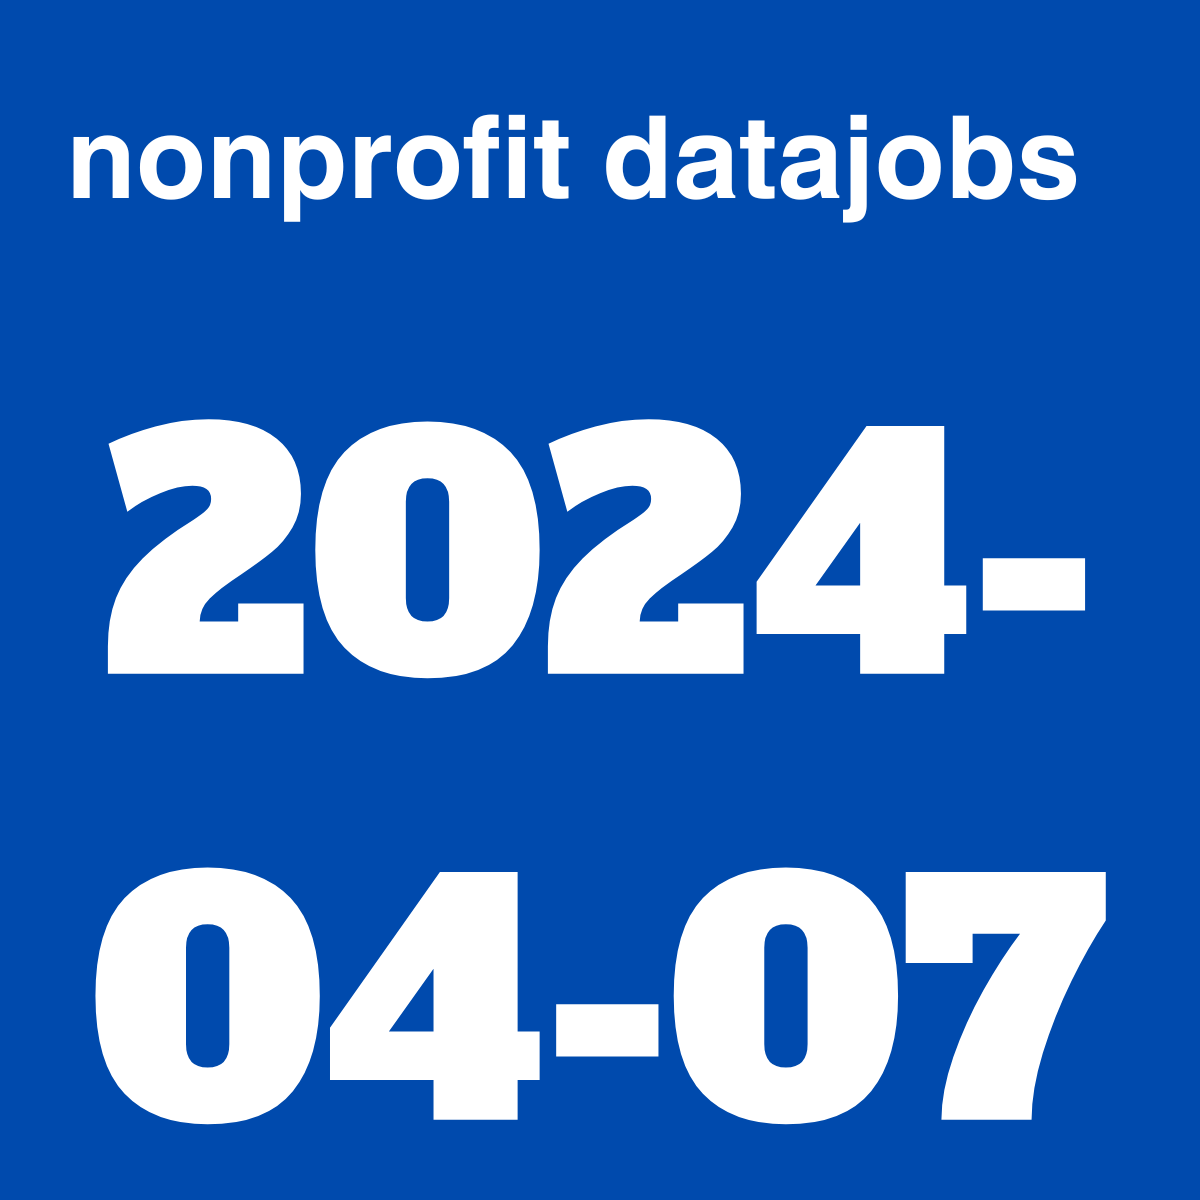 Copy of Copy of Copy of nonprofit datajobs.png